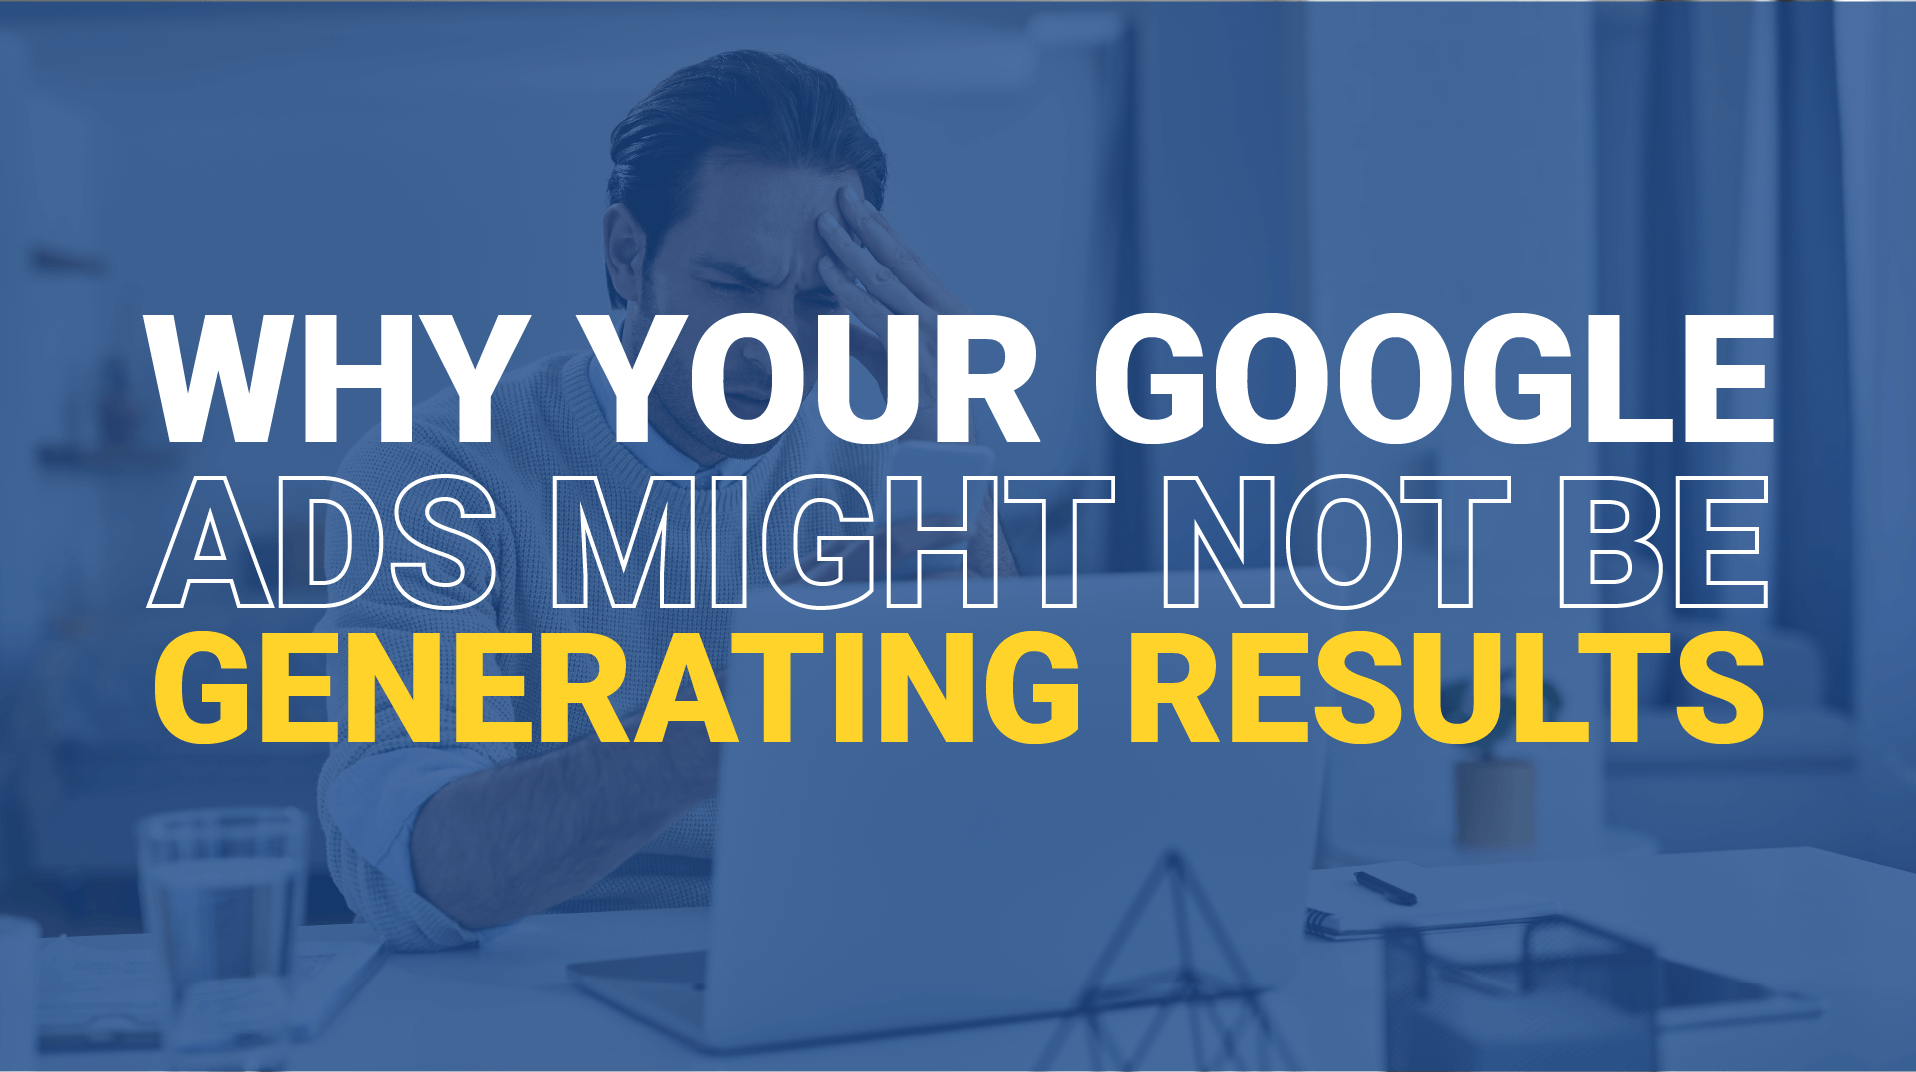 Why Your Google Ads Might not be Generating Results